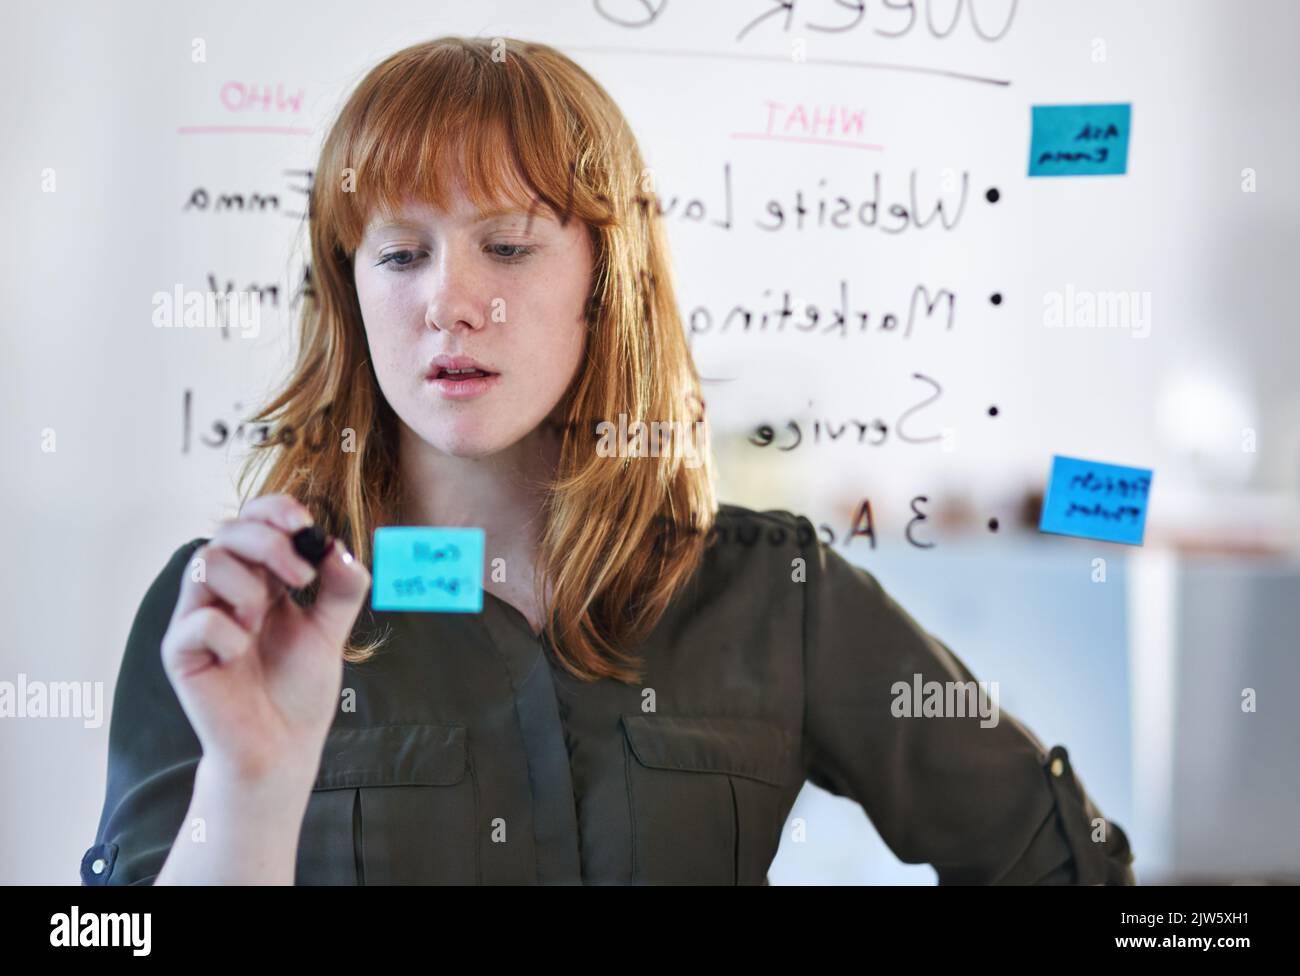 Planning on the pane. a young woman creating a plan on glass in a modern office. Stock Photo